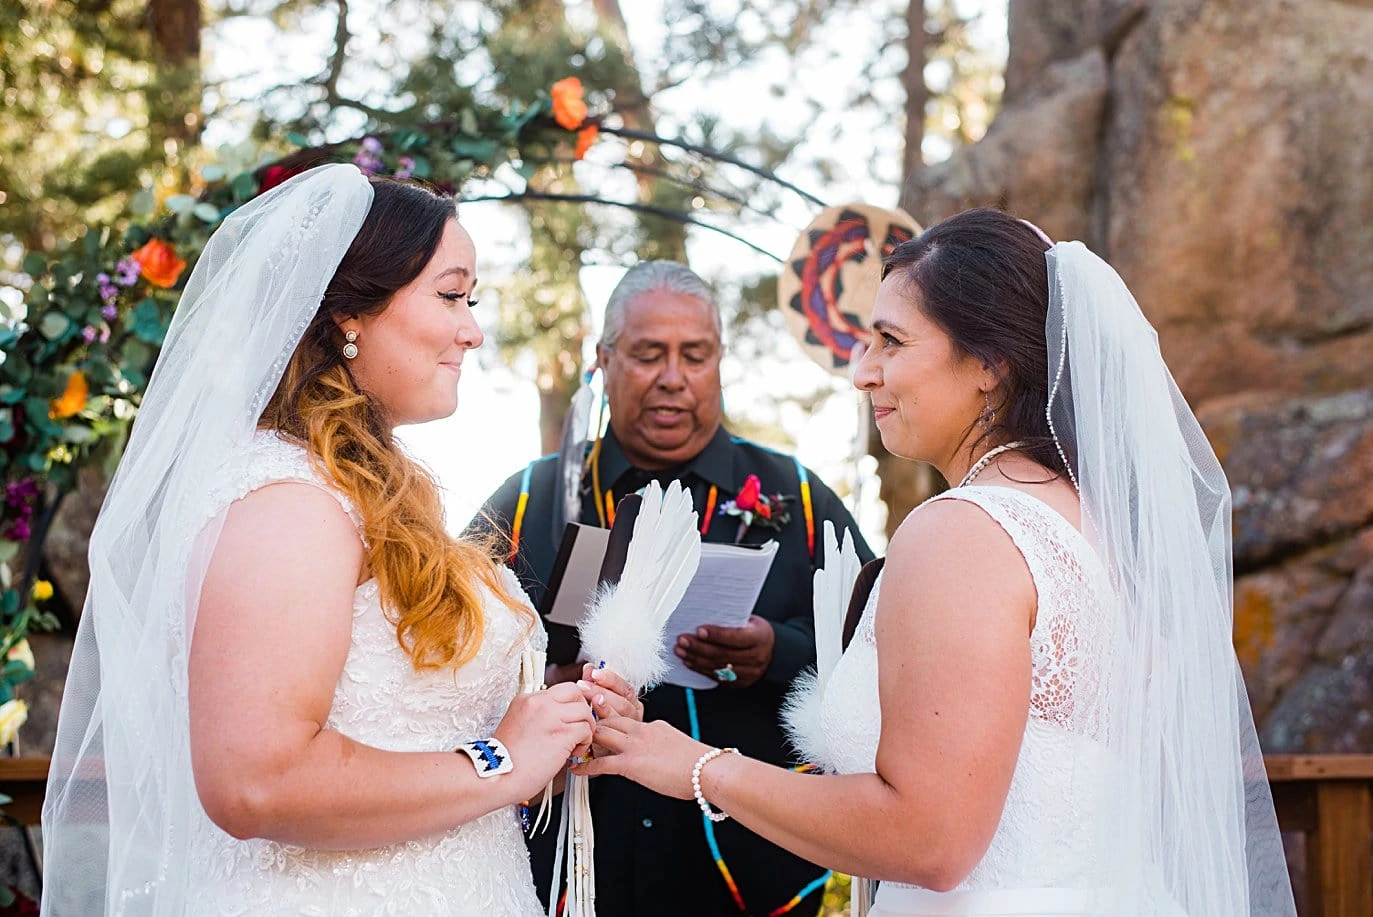 brides exchange rings during queer wedding ceremony at fall Deer Creek Valley Ranch wedding by Boulder wedding photographer Jennie Crate